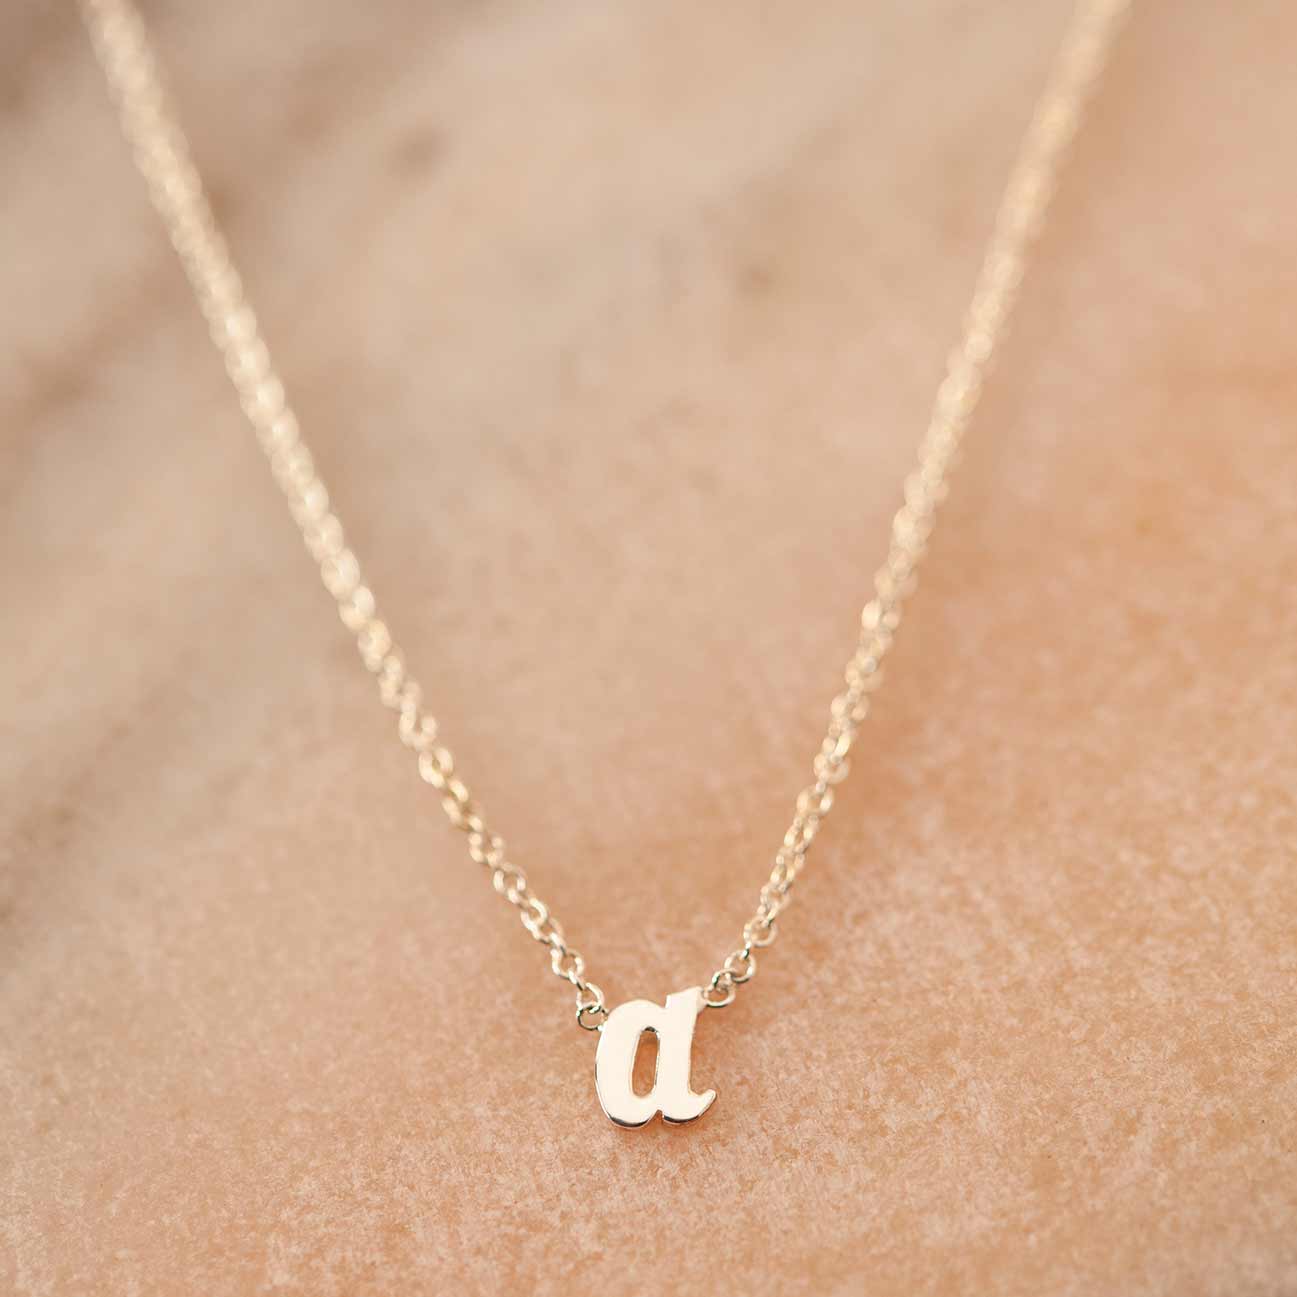 Buy Lowercase Gold Initial Saba Necklace - Adorn512 – adorn512